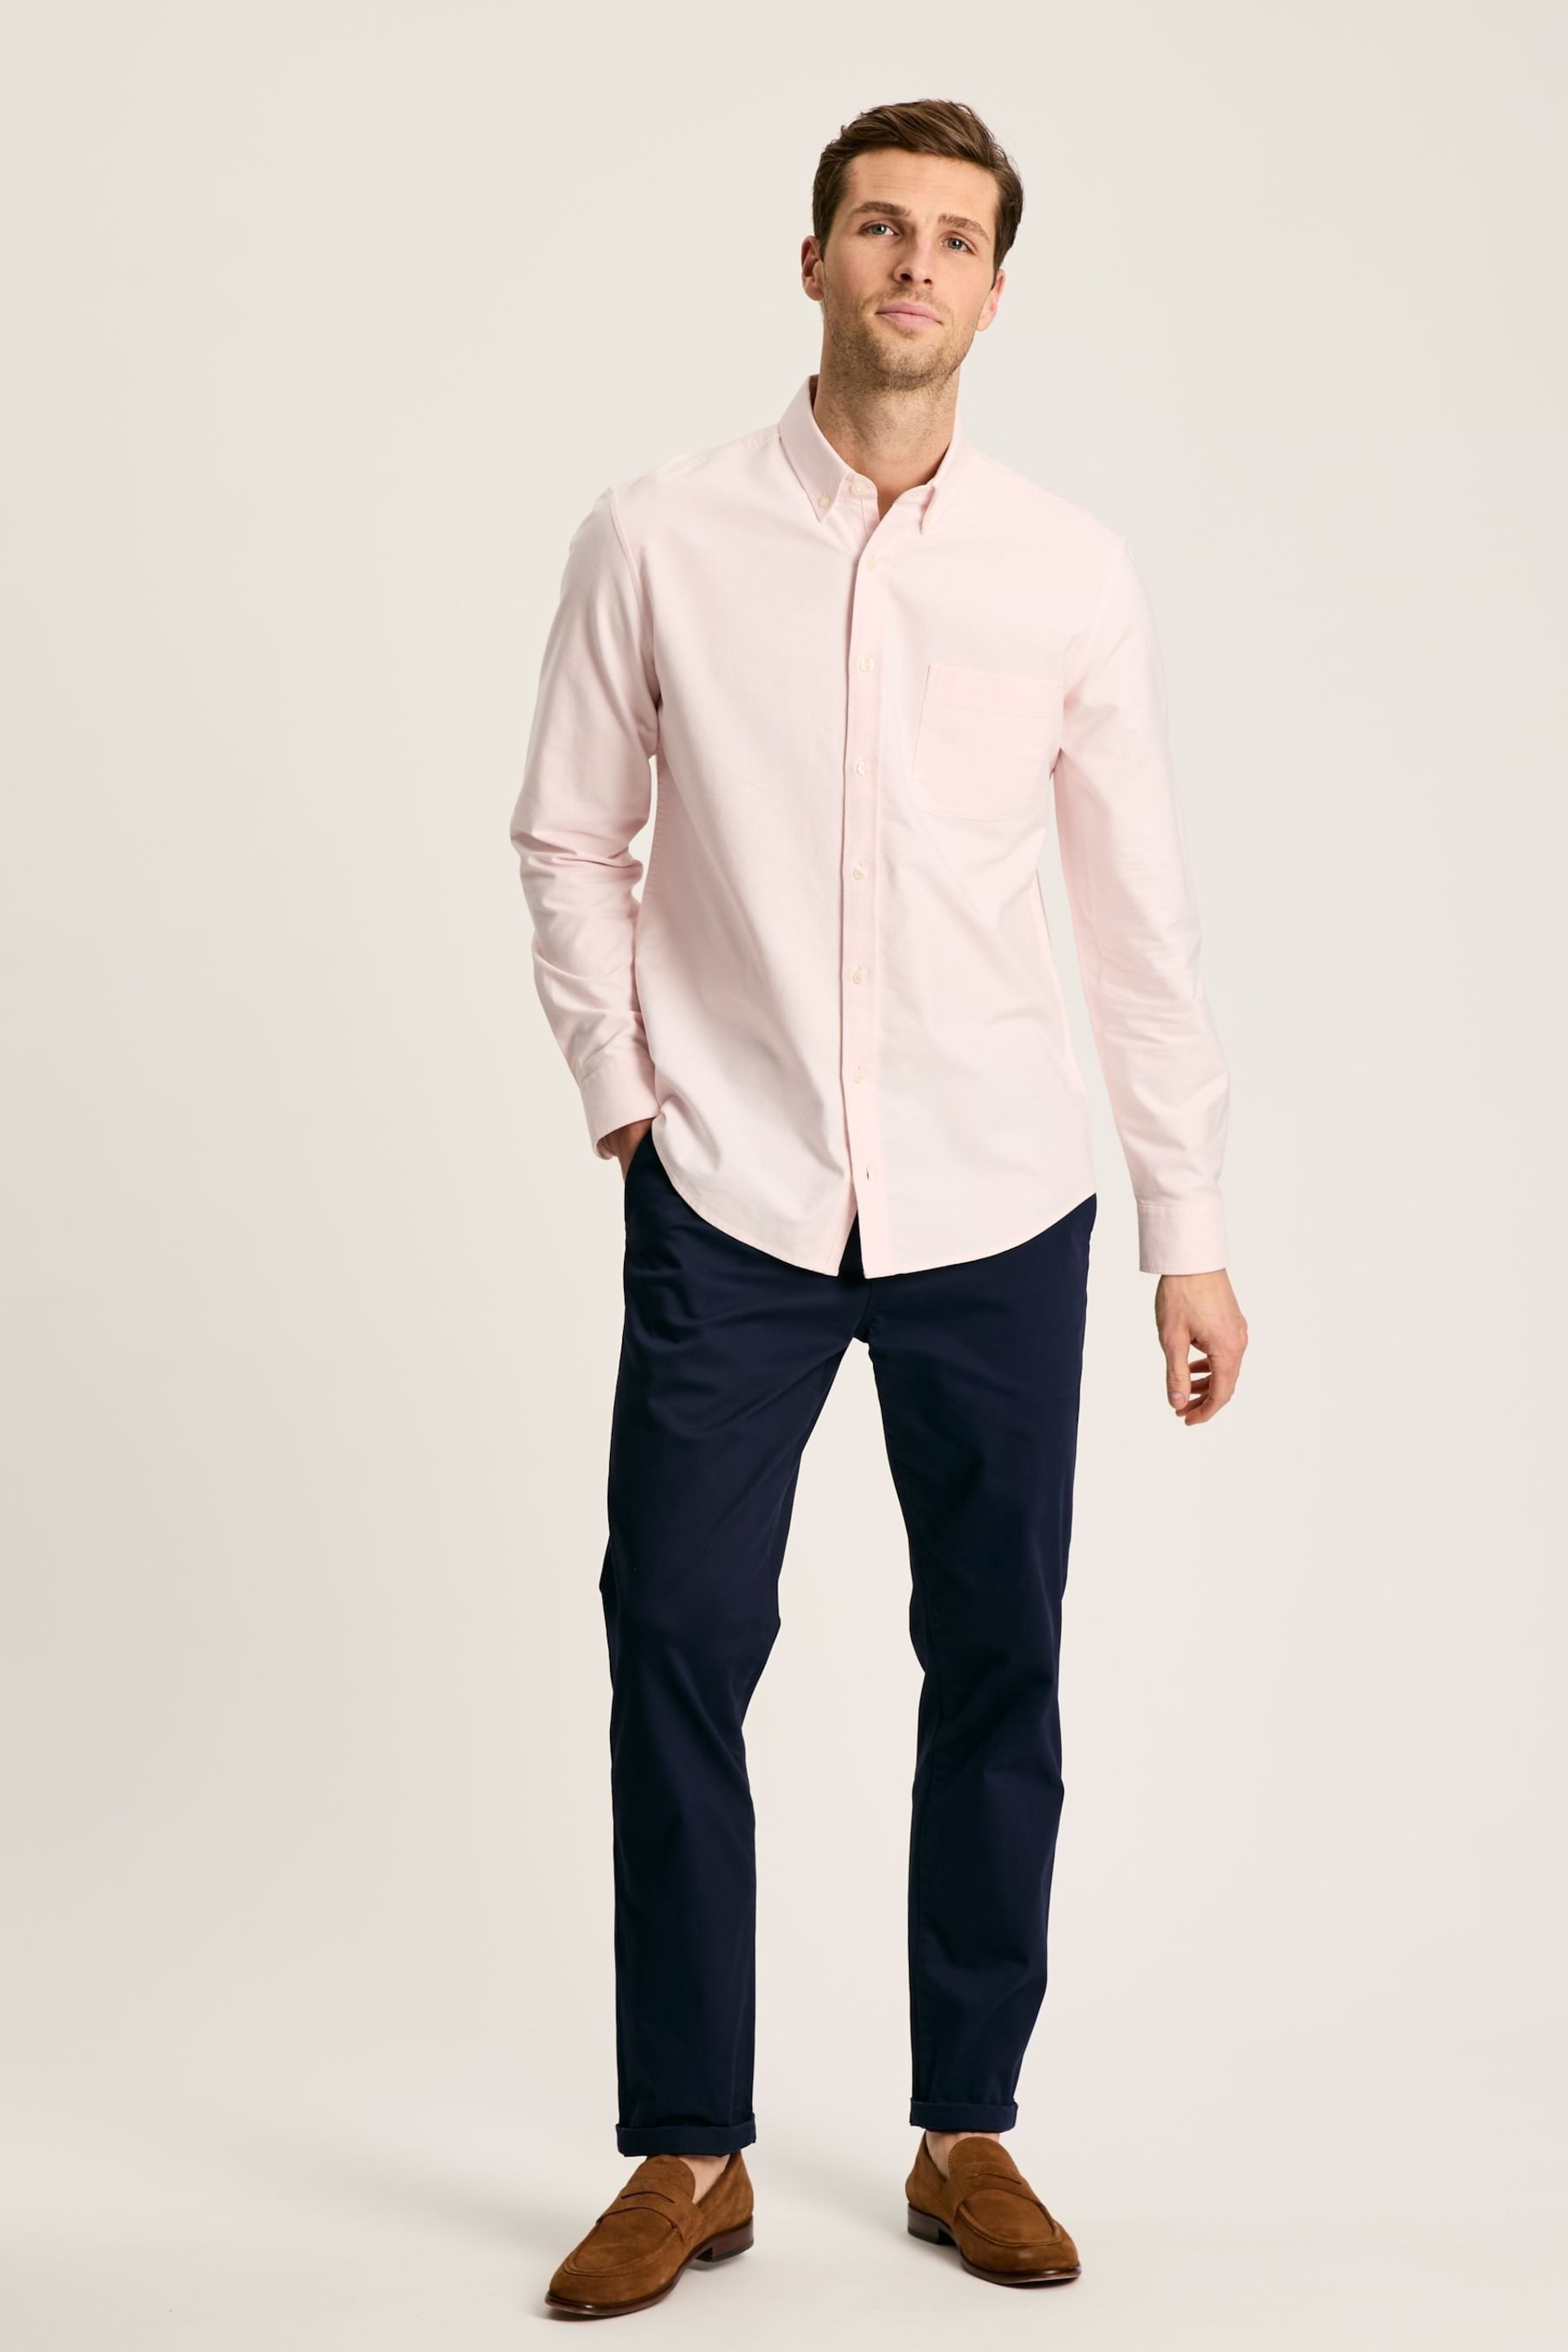 Joules Oxford Pink Long Sleeve Classic Fit Shirt - Image 3 of 7